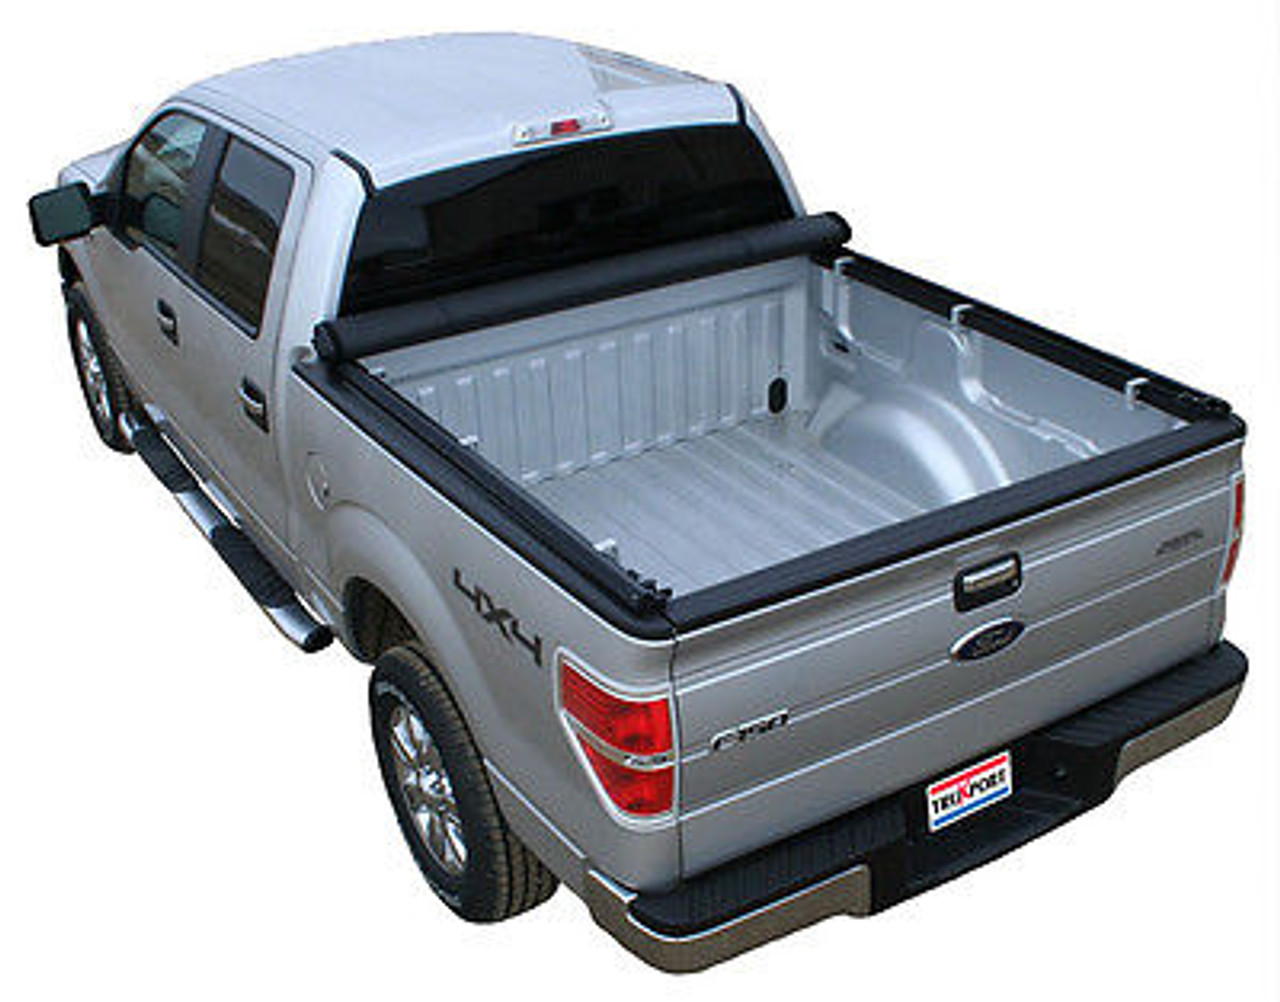 258601 - TRUXEDO TRUXPORT SOFT ROLL UP TONNEAU COVER 97-03 FORD F150 8' BED NO FLARESIDE